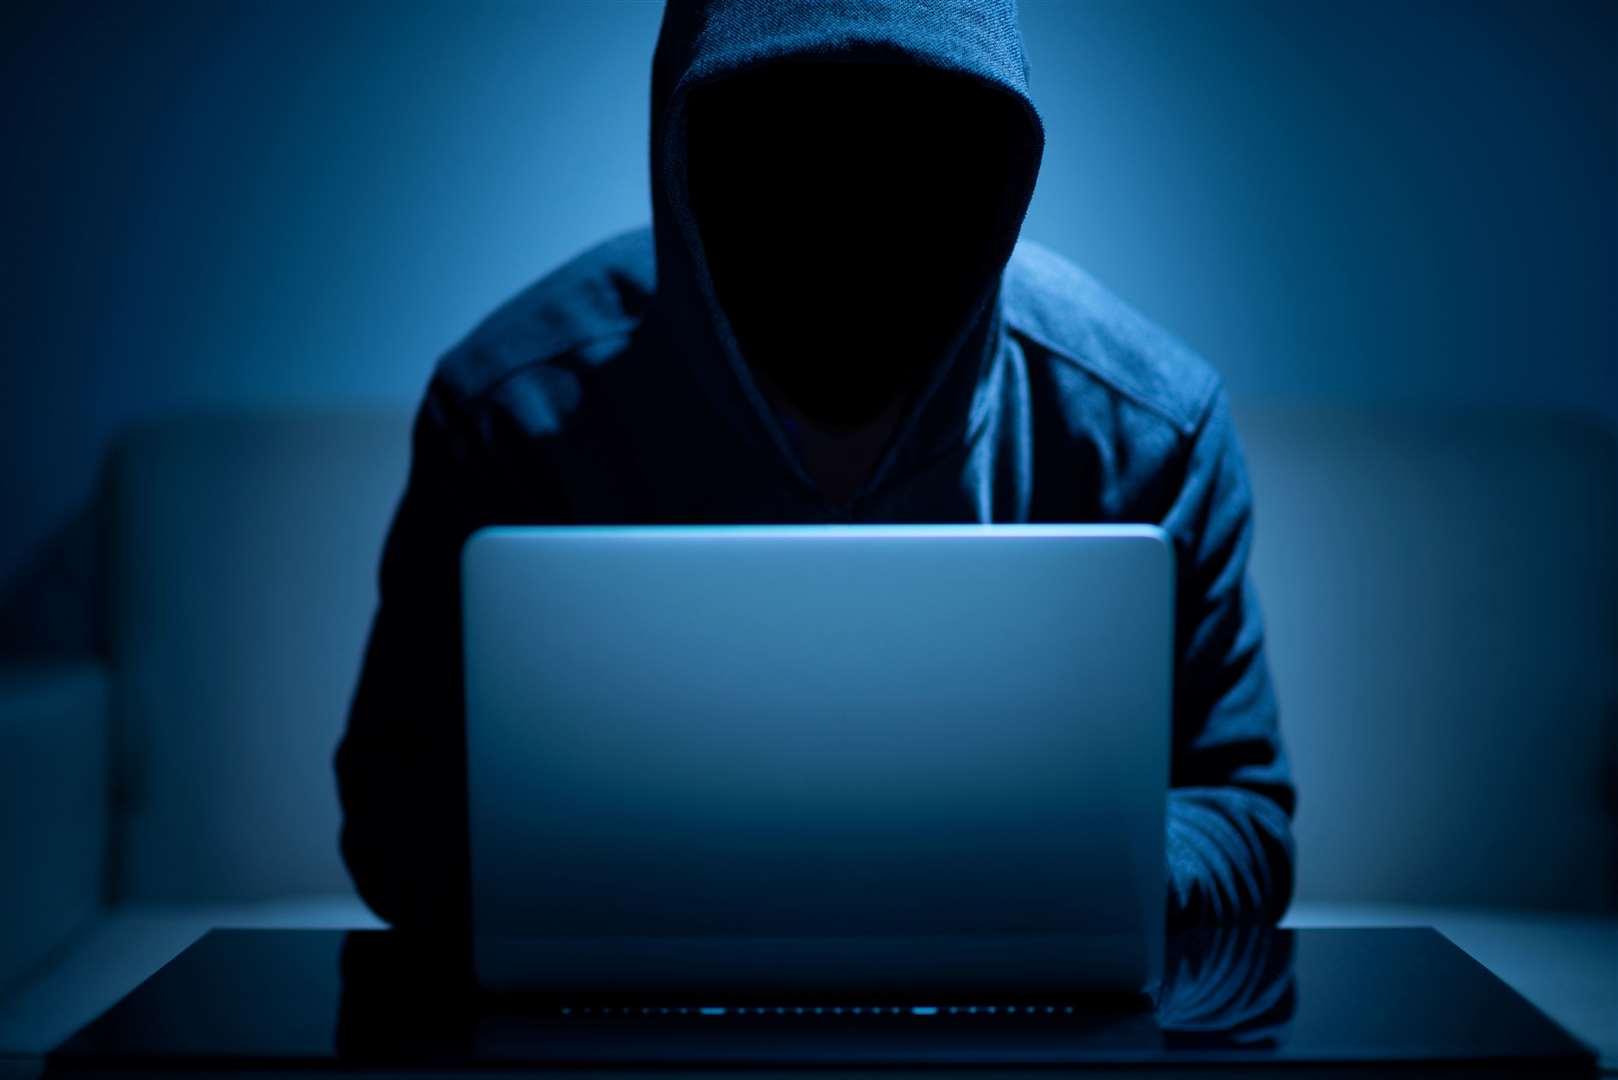 The fraudsters generate a passcode in order to gain access to an account. Image: iStock.